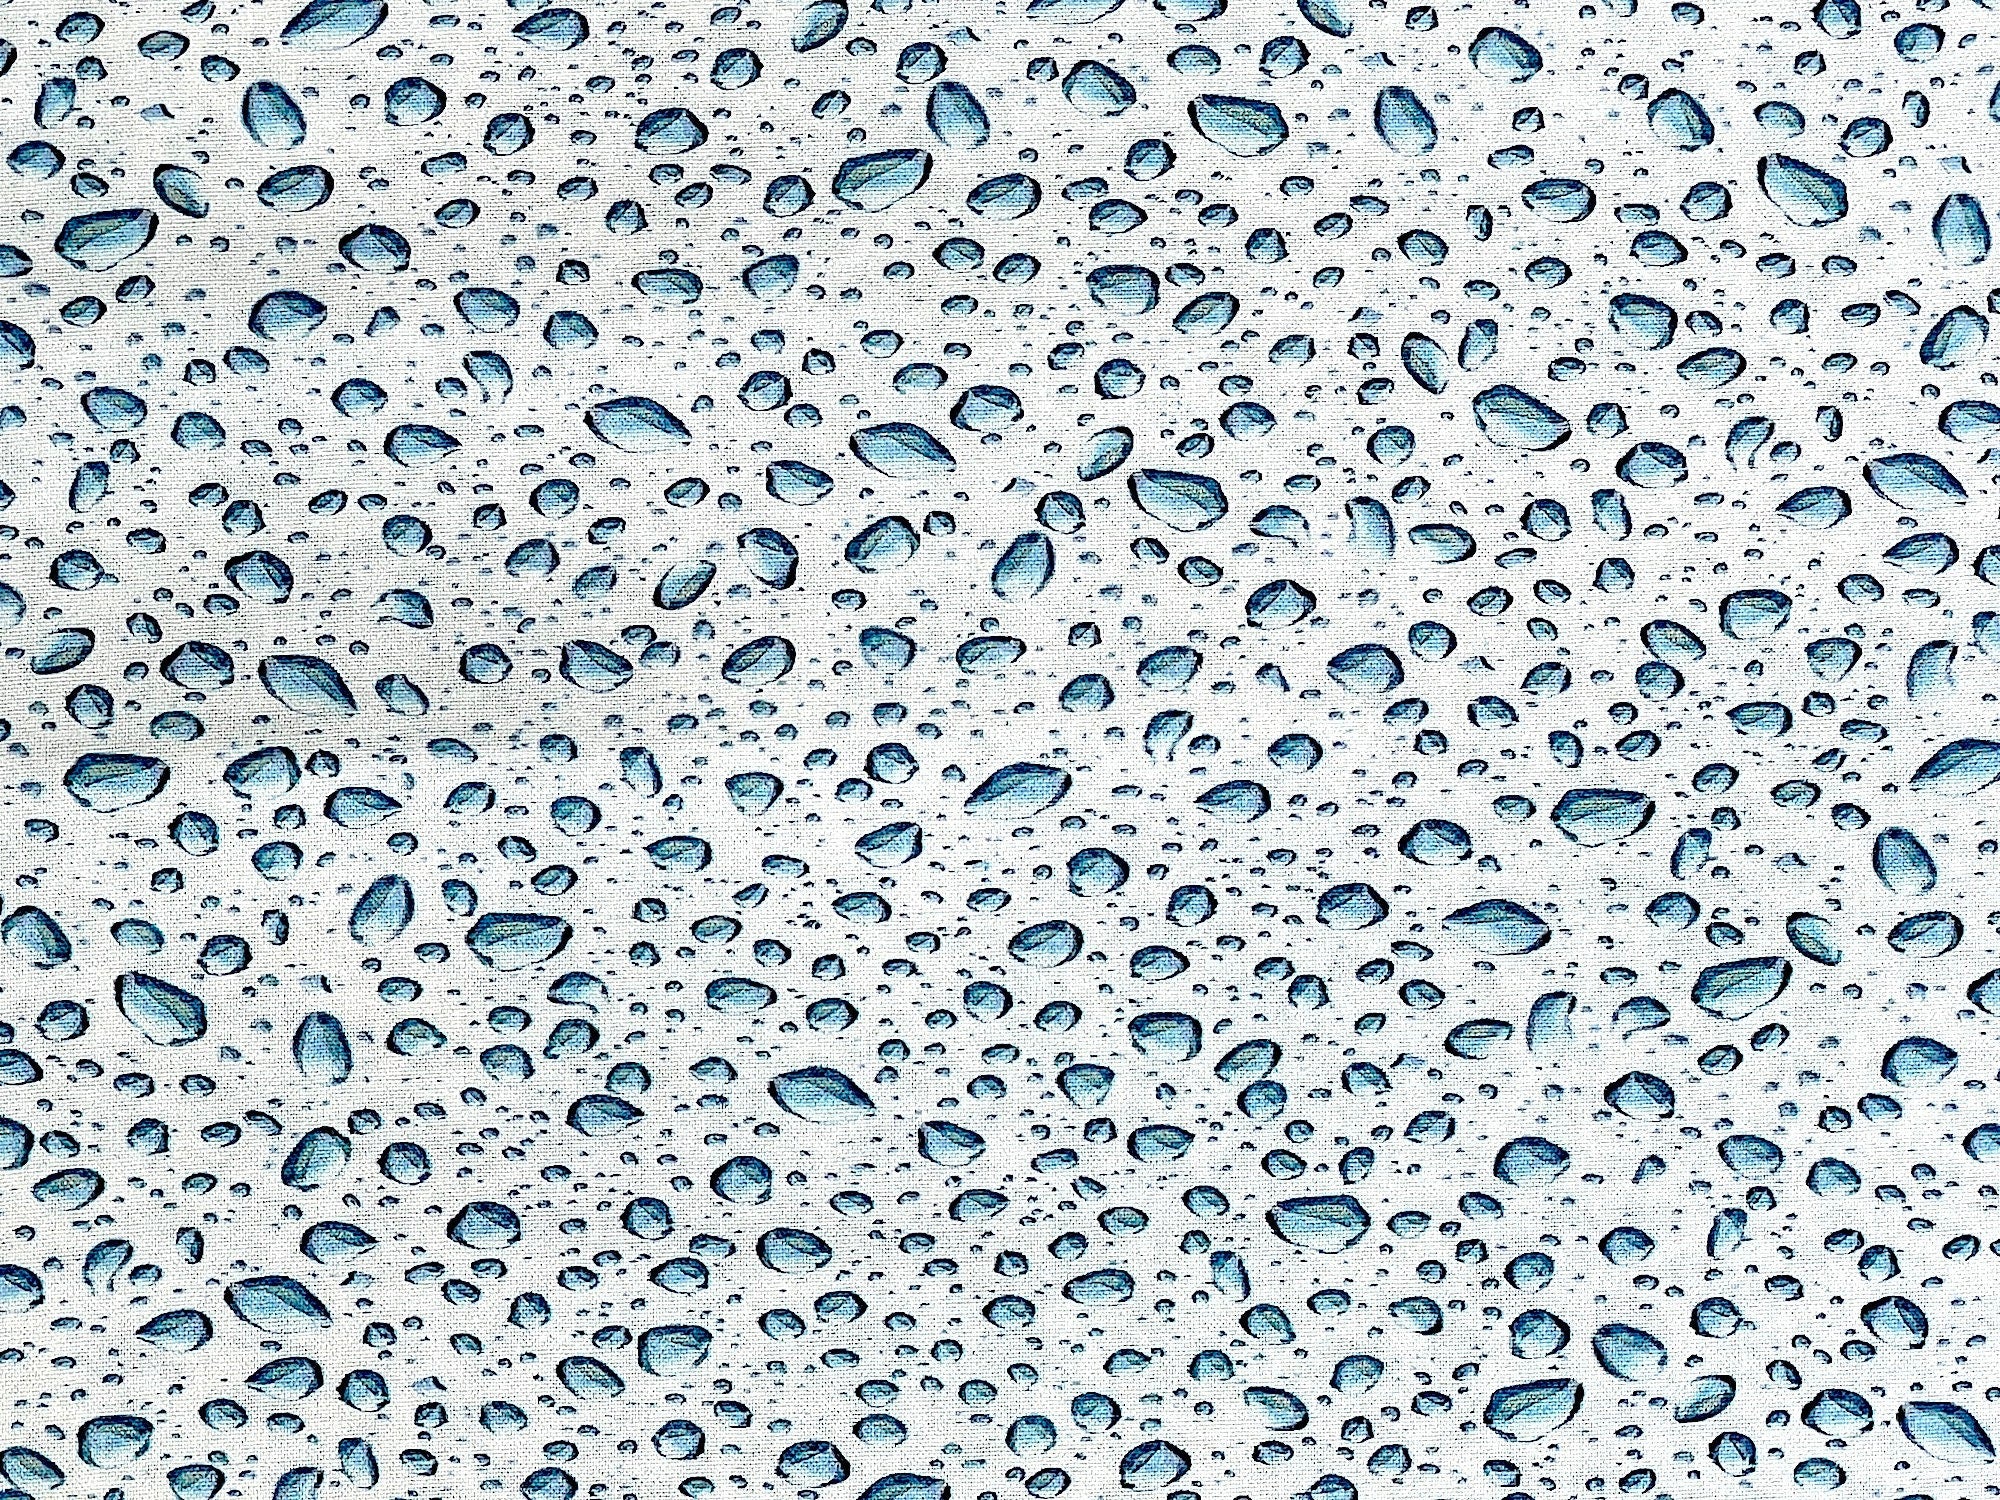 Water Drop Fabric - Open Air - Nature Fabric - Cotton Fabric - Quilting Fabric - NAT-33